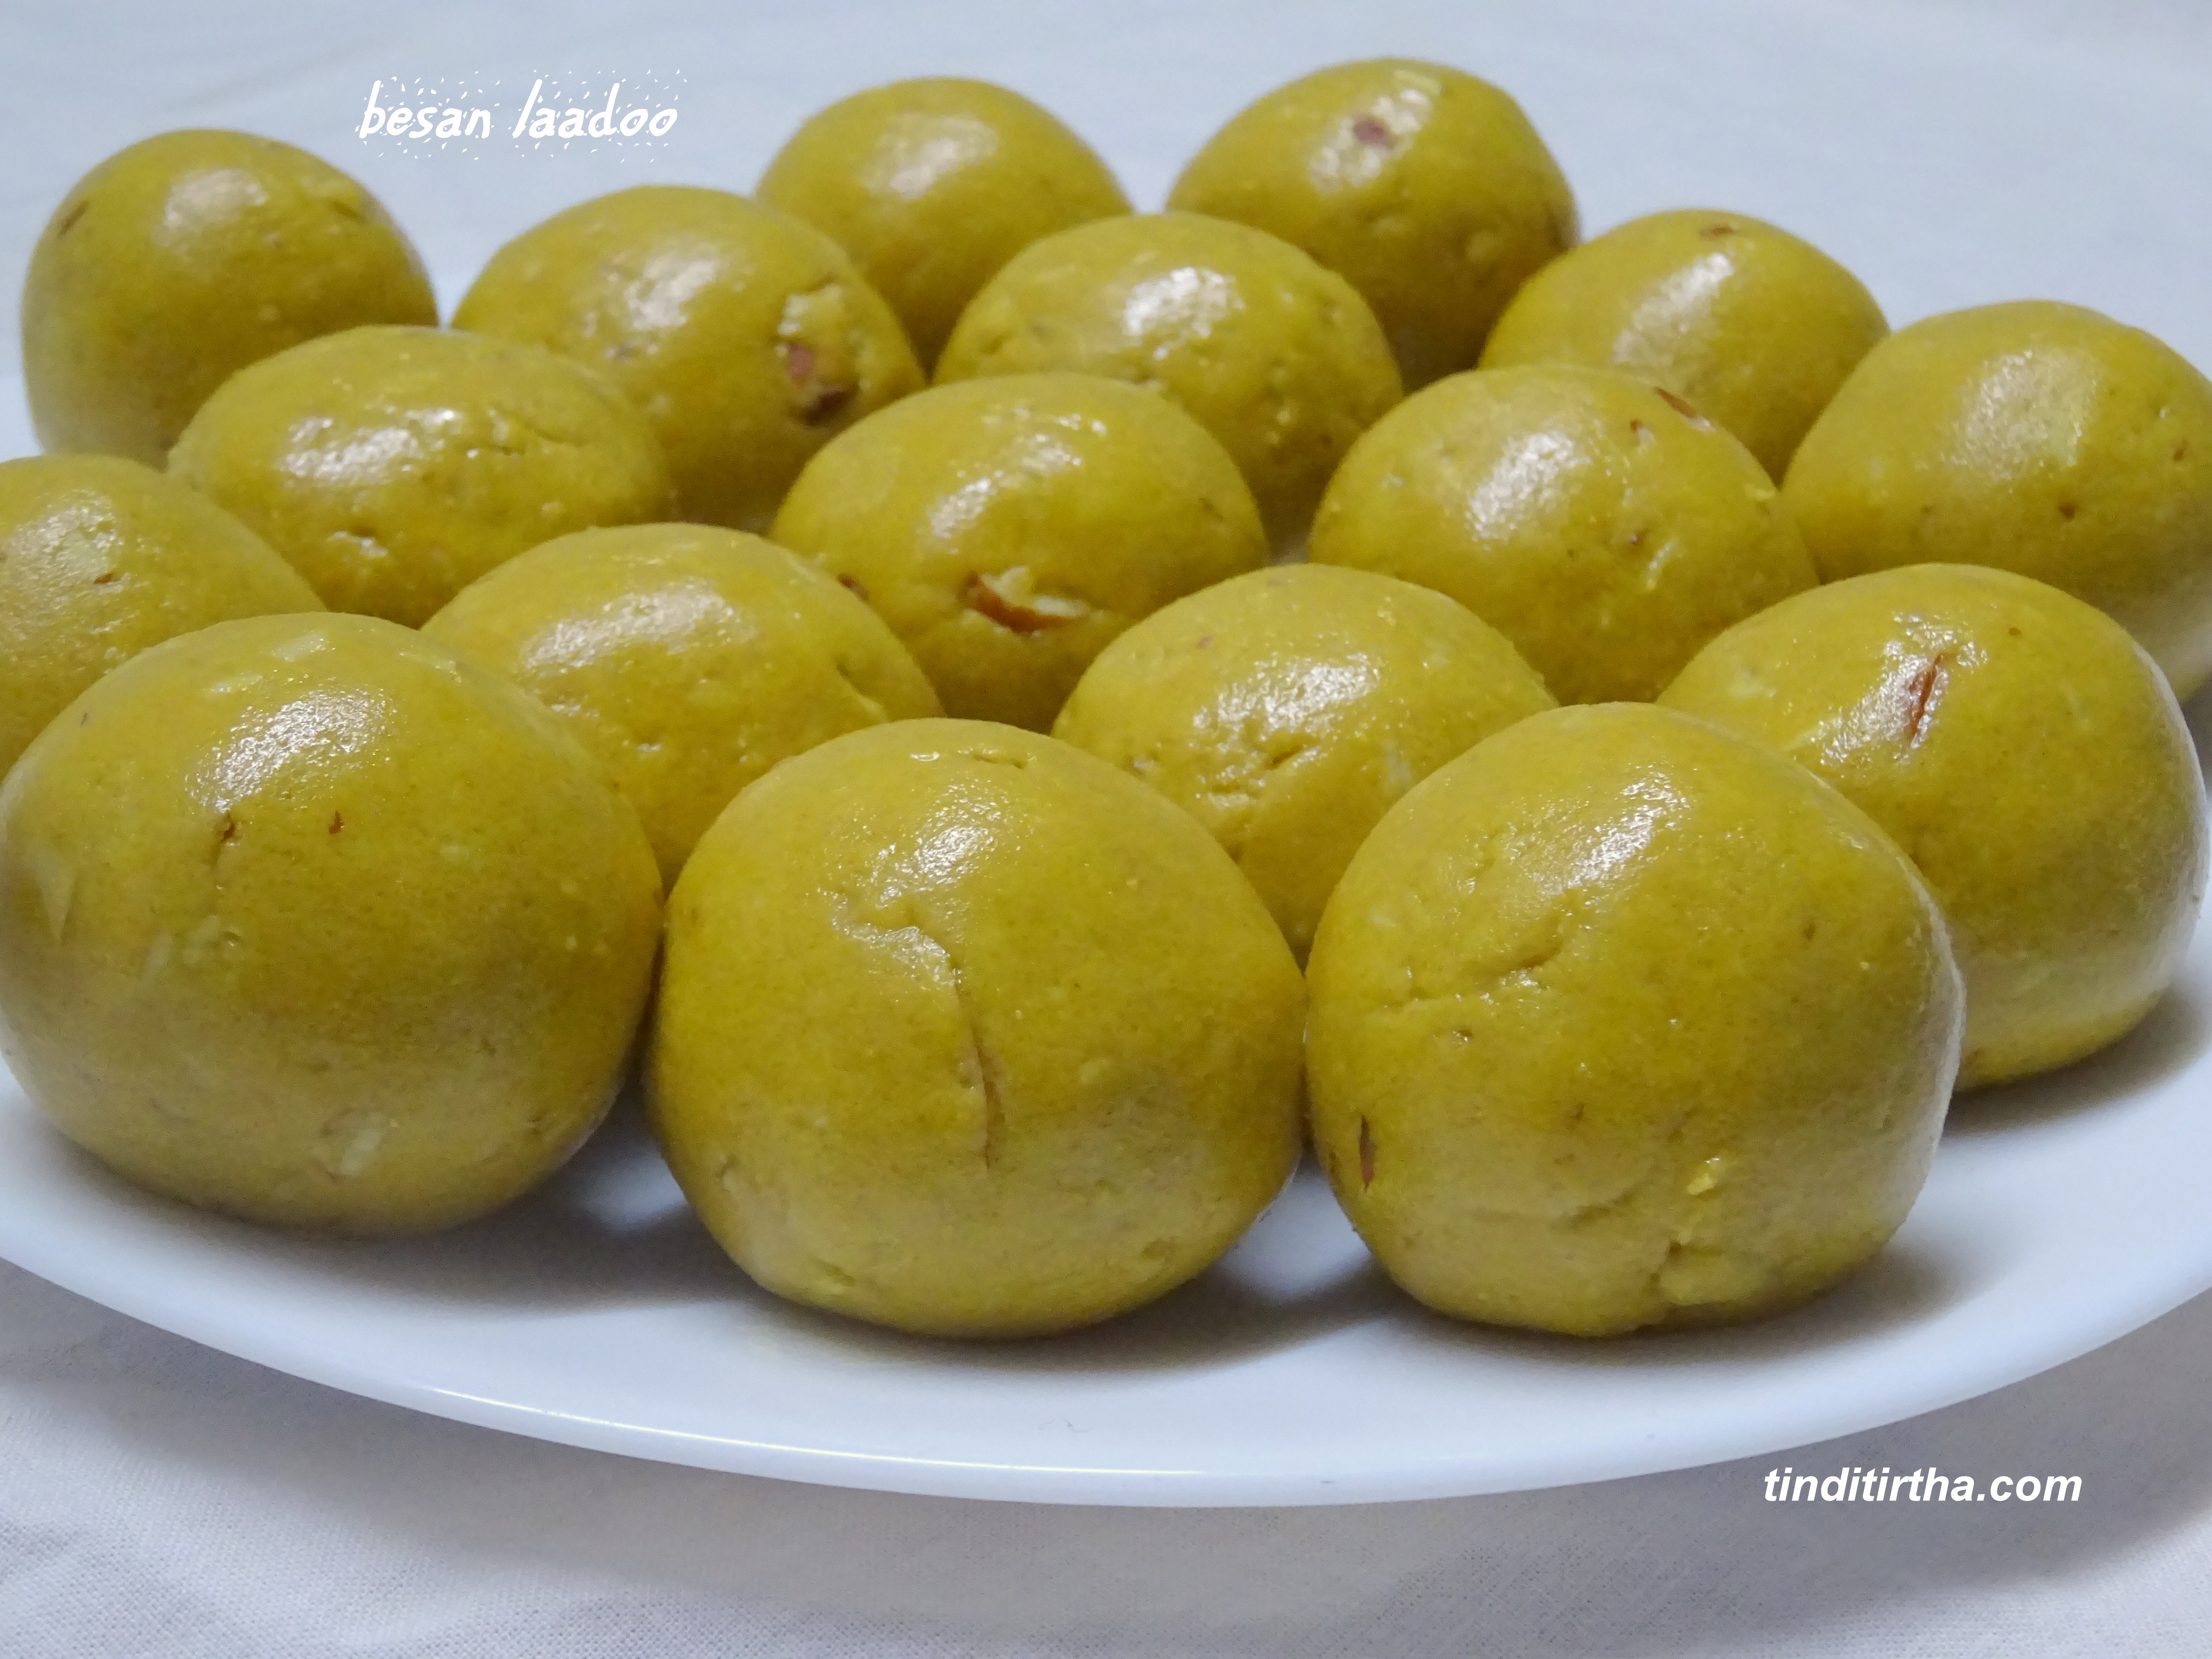 BESAN LAADOO/besan laddu/besan unde using raw cane sugar, less ghee also with the goodness of almonds